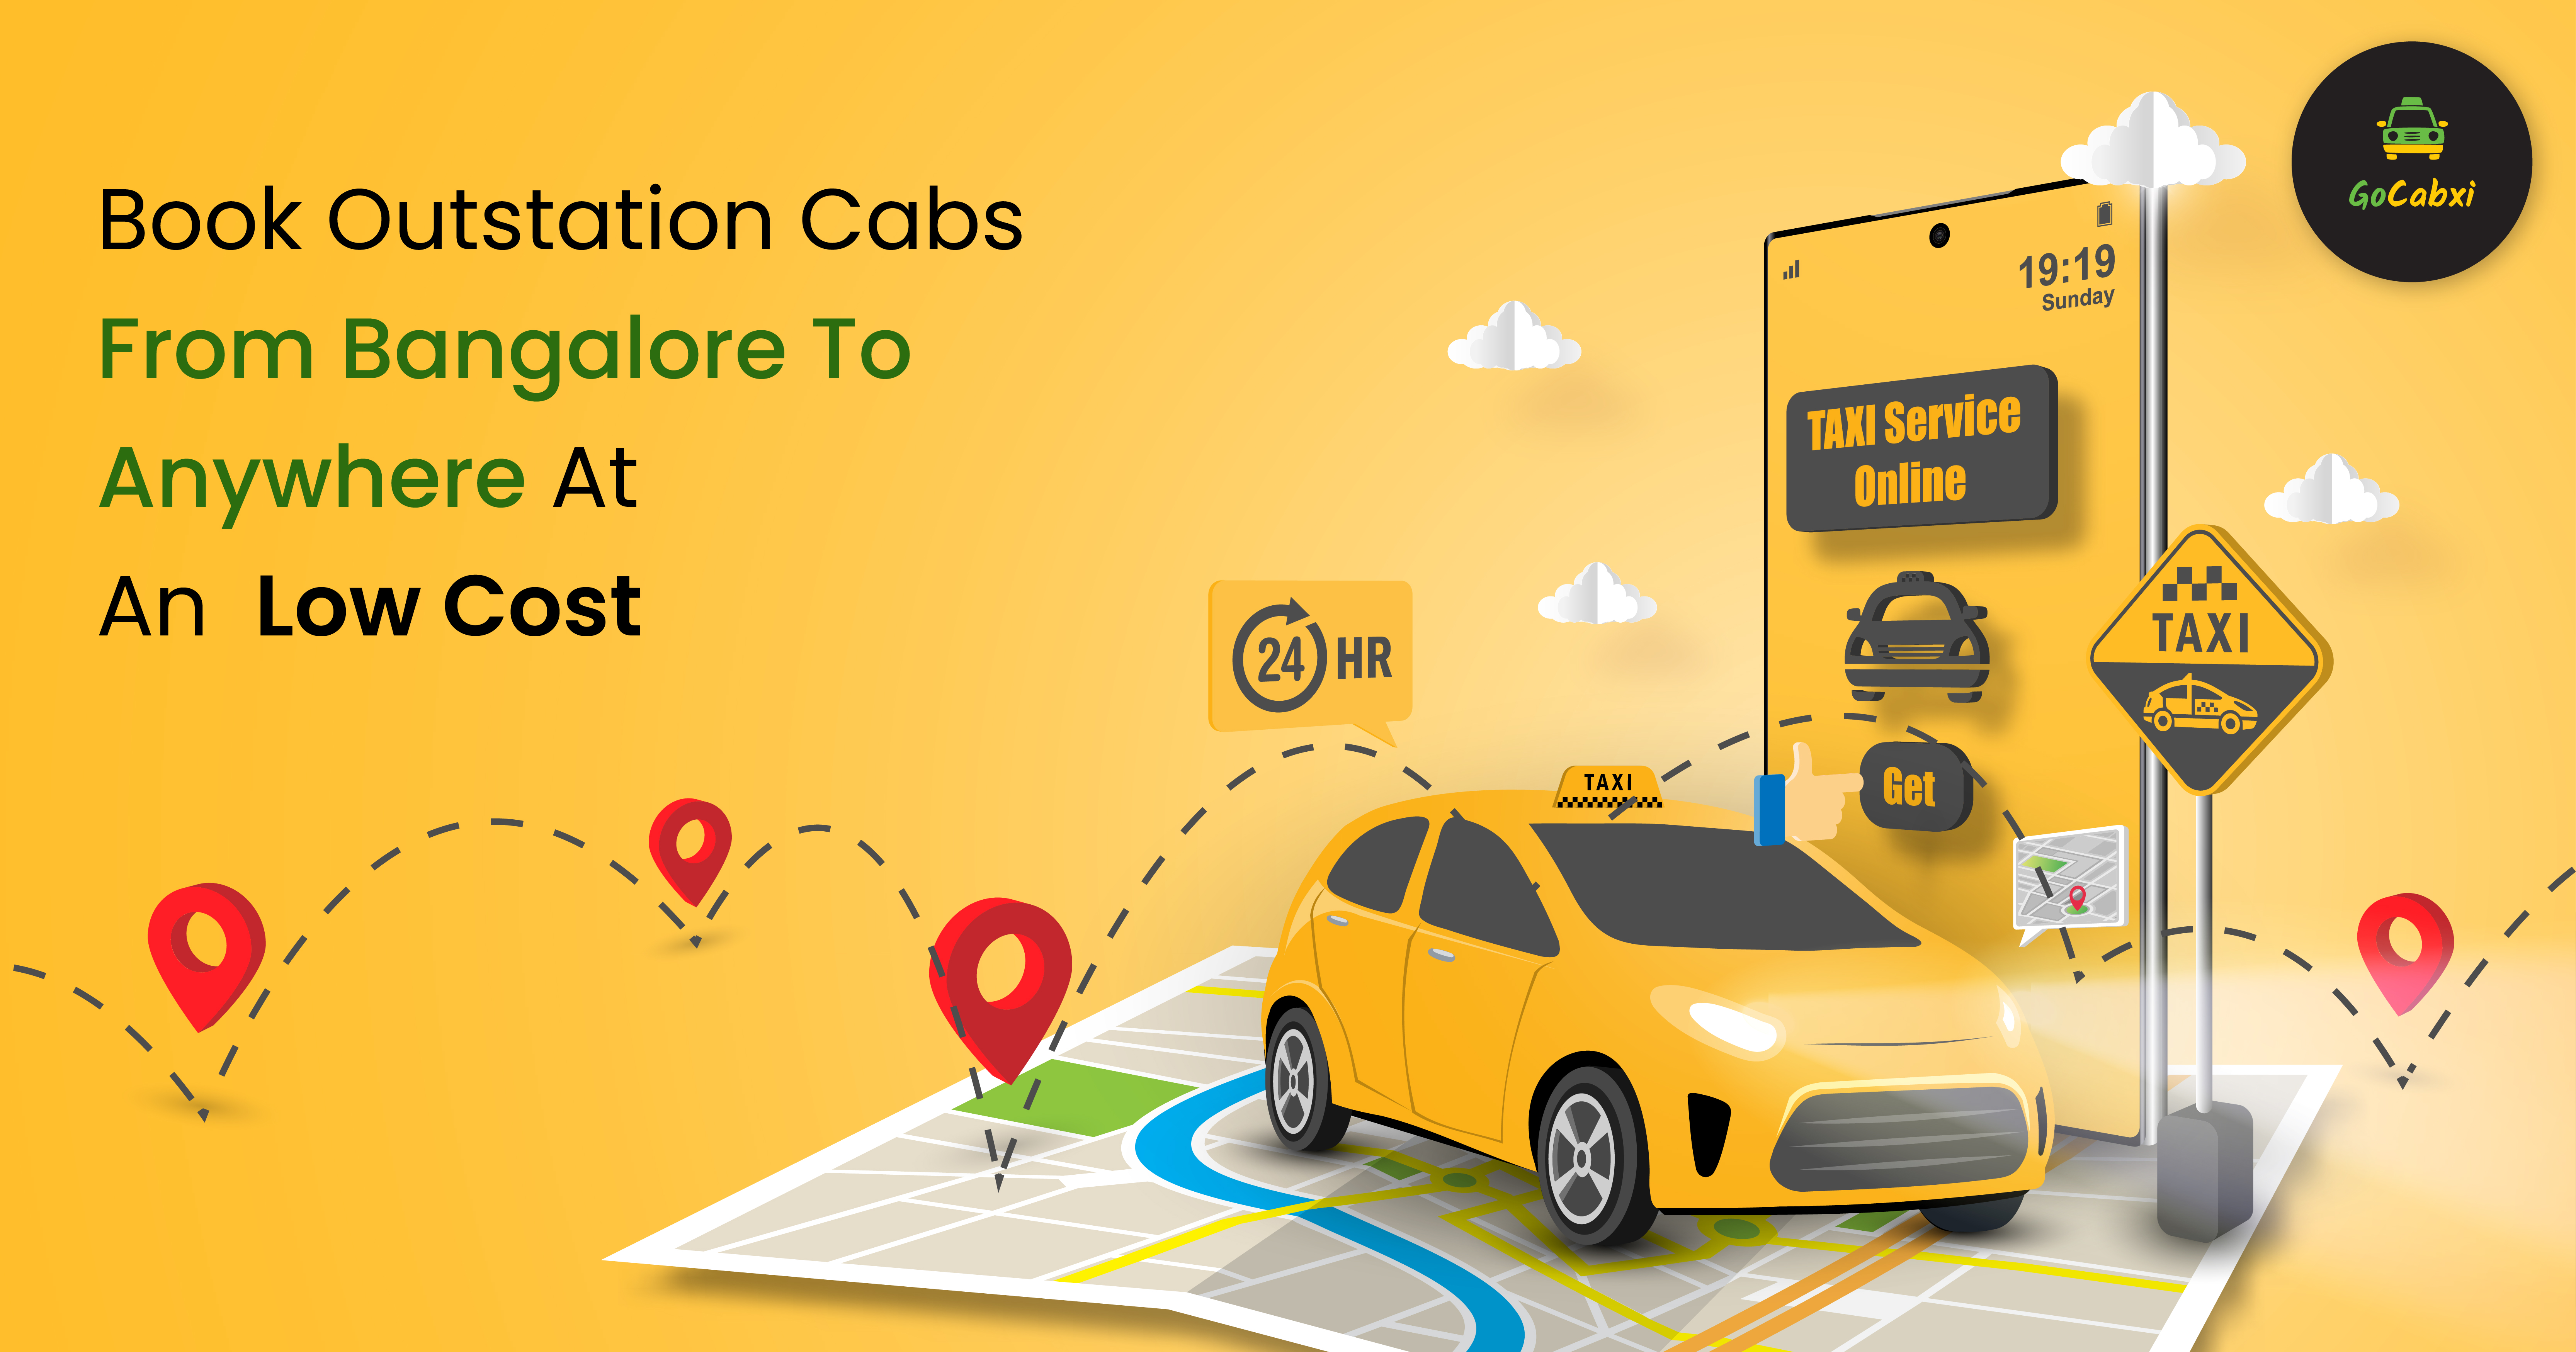 Book Outstation Cabs From Bangalore To Anywhere At An Low Cost